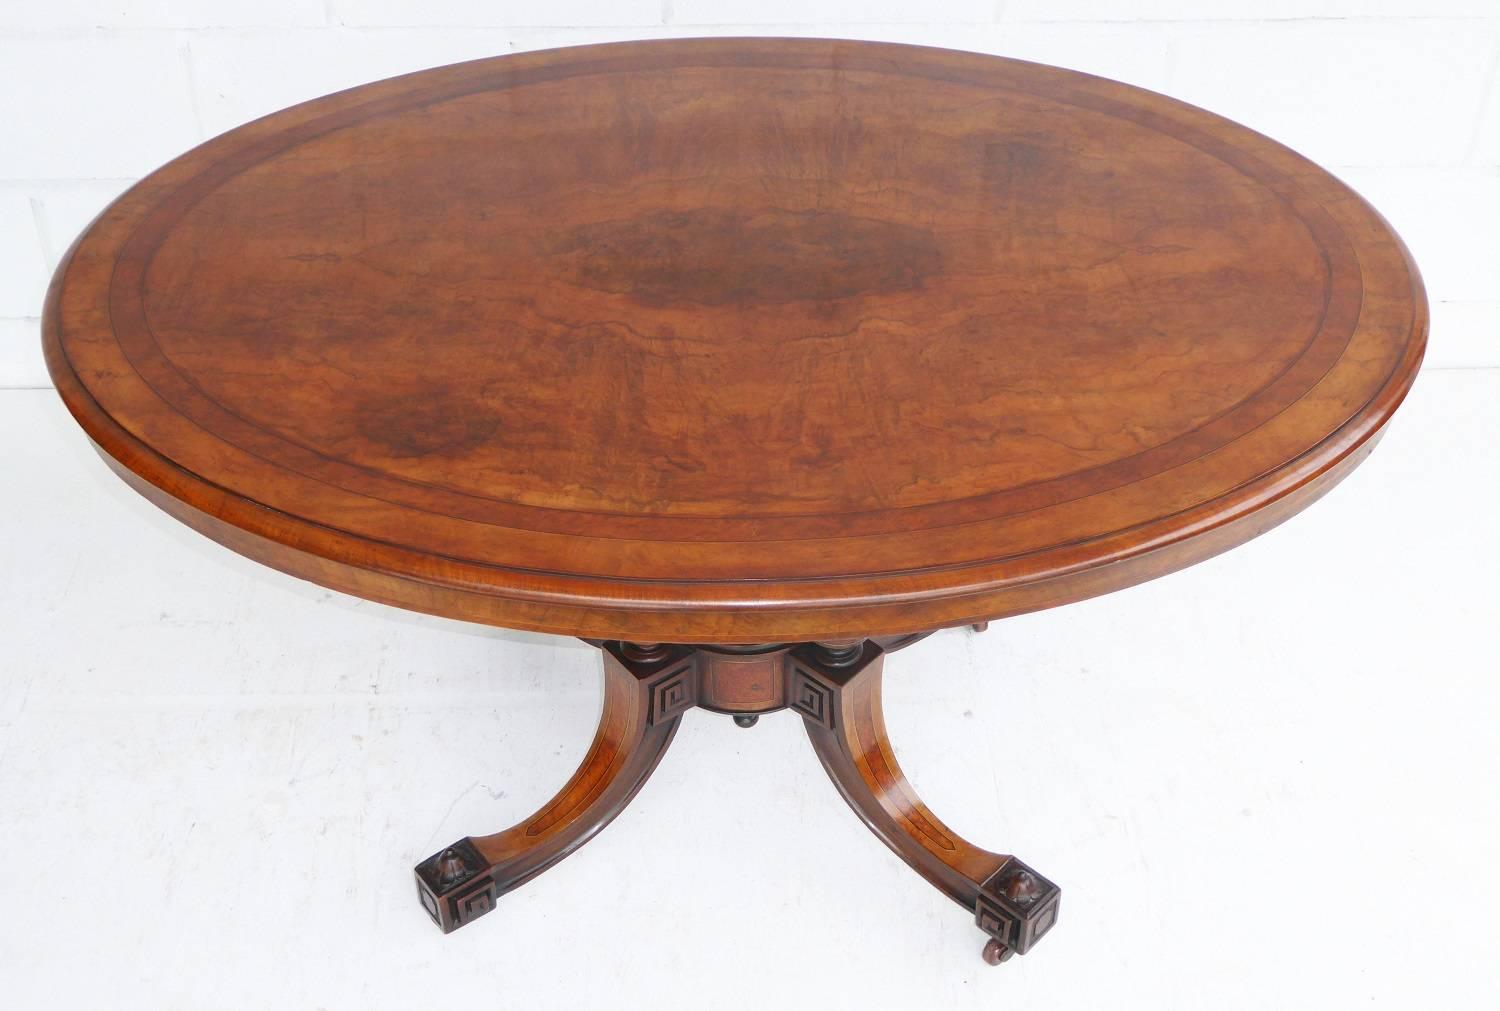 For sale is a good quality Victorian burr walnut and inlaid oval loo table. The top of the table is inlaid and banded above a birdcage base. The base has four columns with an ornate finial to the centre, standing on four satinwood banded splayed